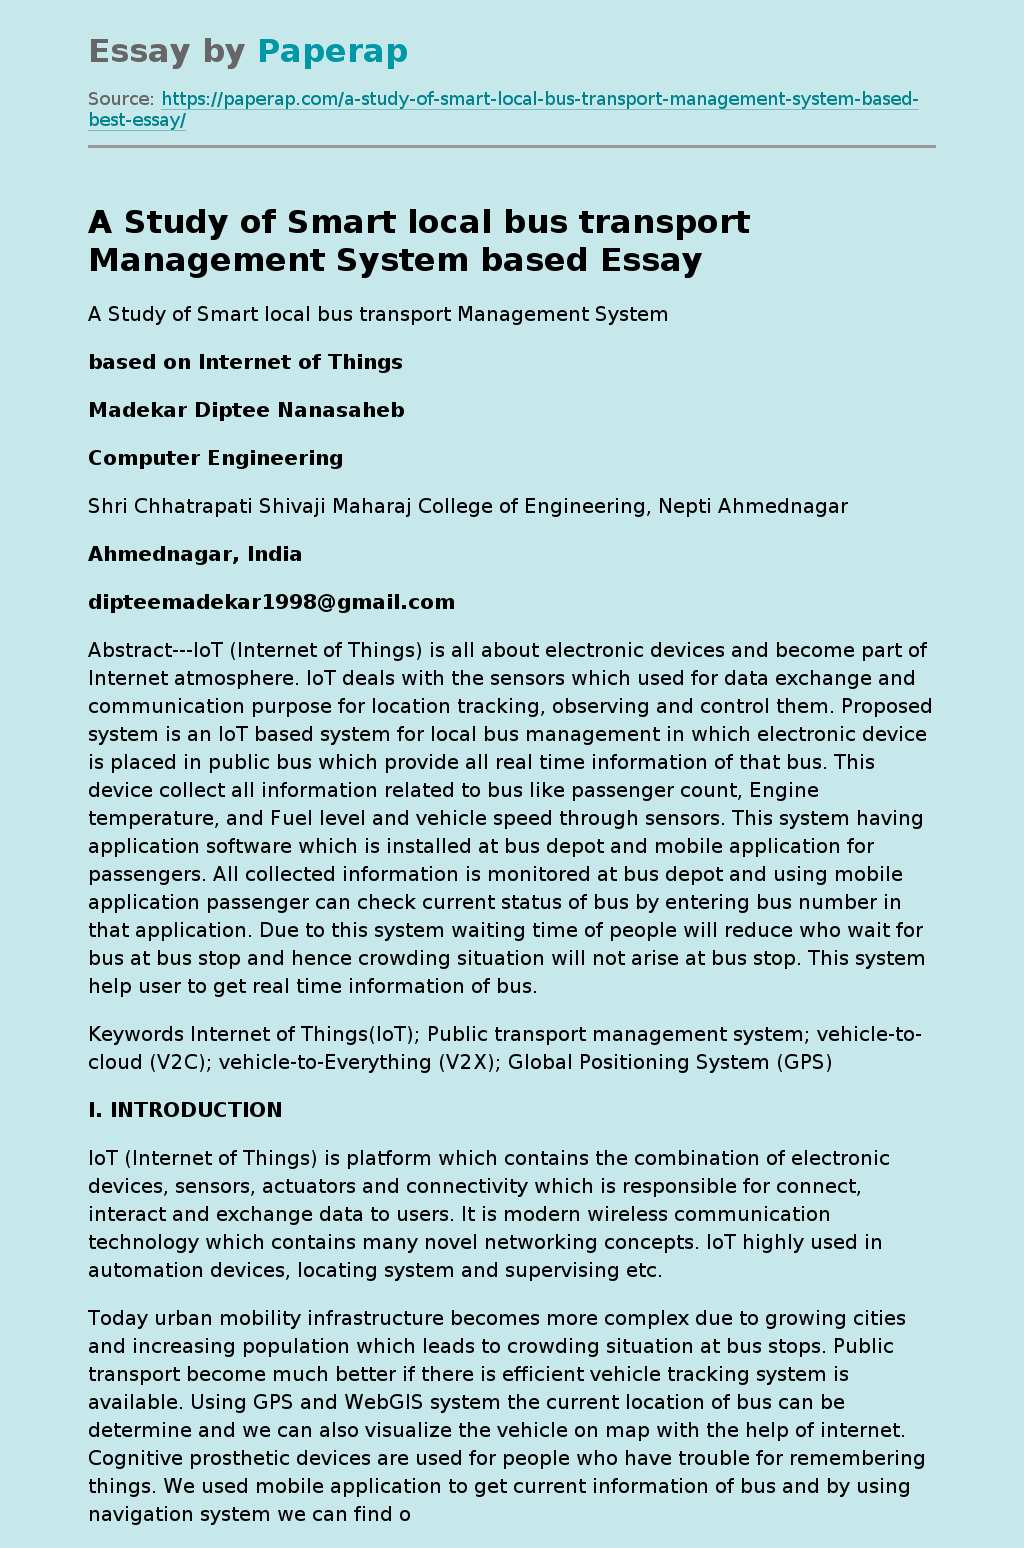 A Study of Smart local bus transport Management System based